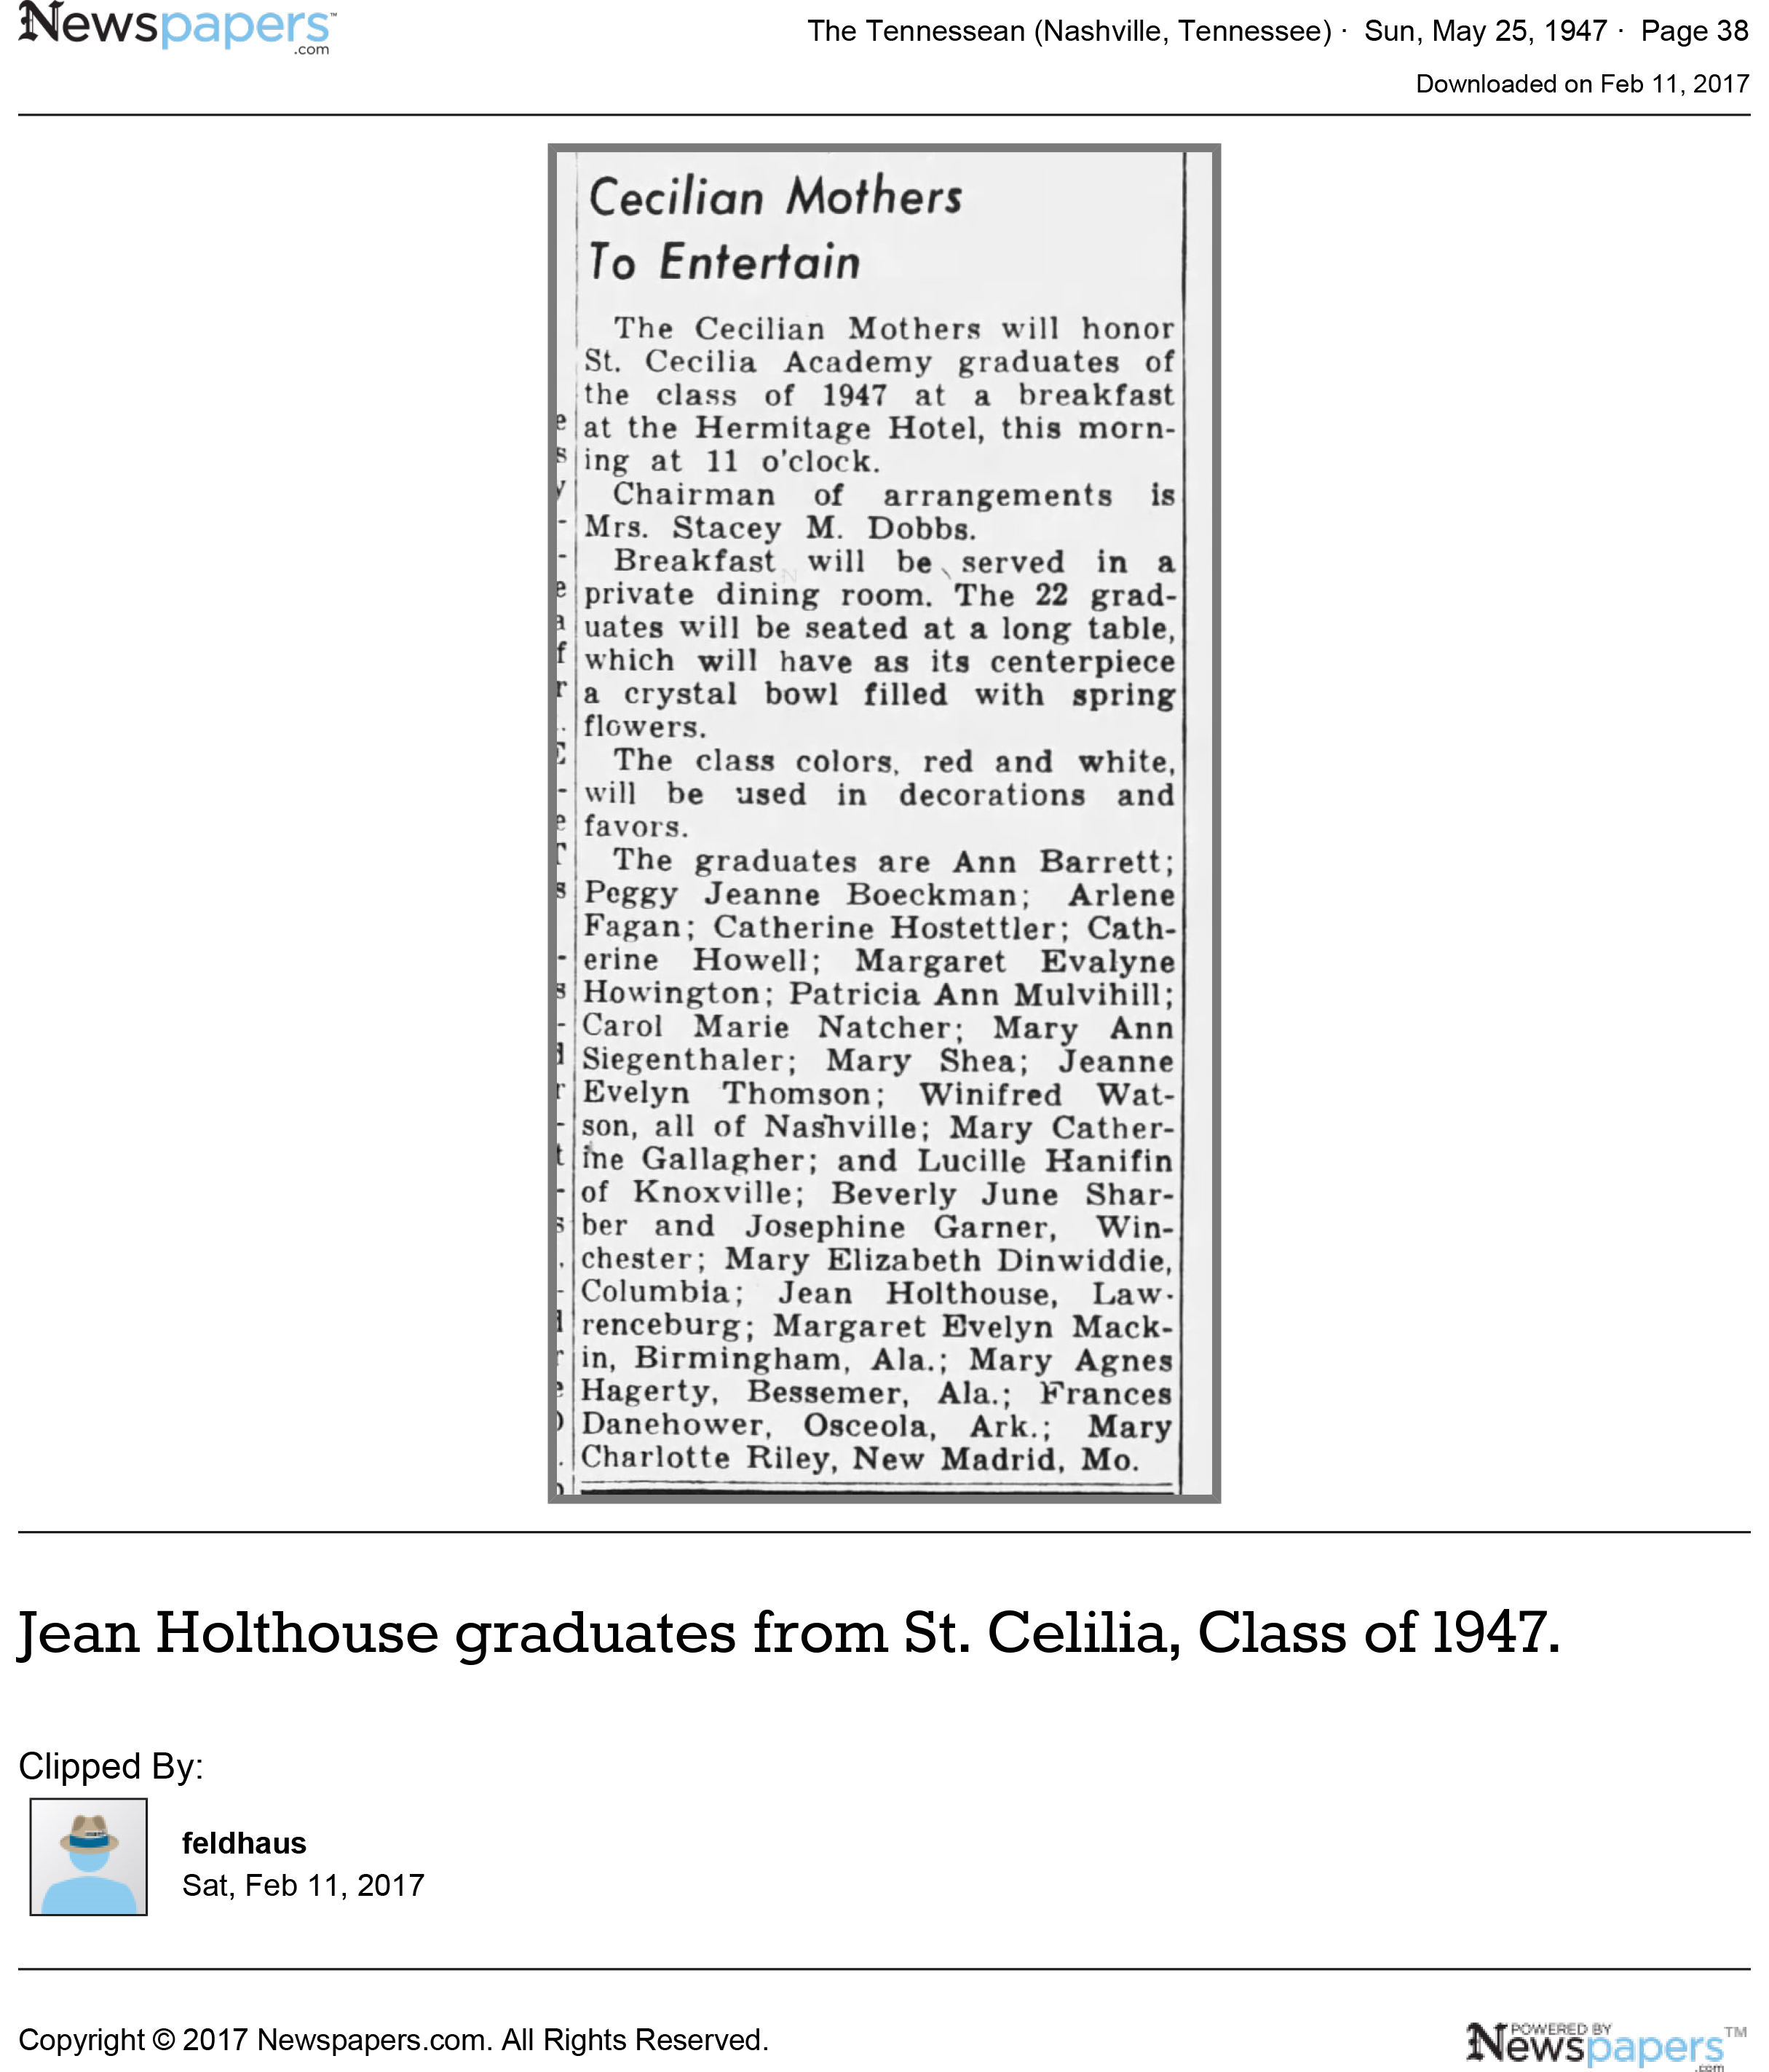 jean_holthouse_graduates_from_st__celilia__class_of_1947_.jpg